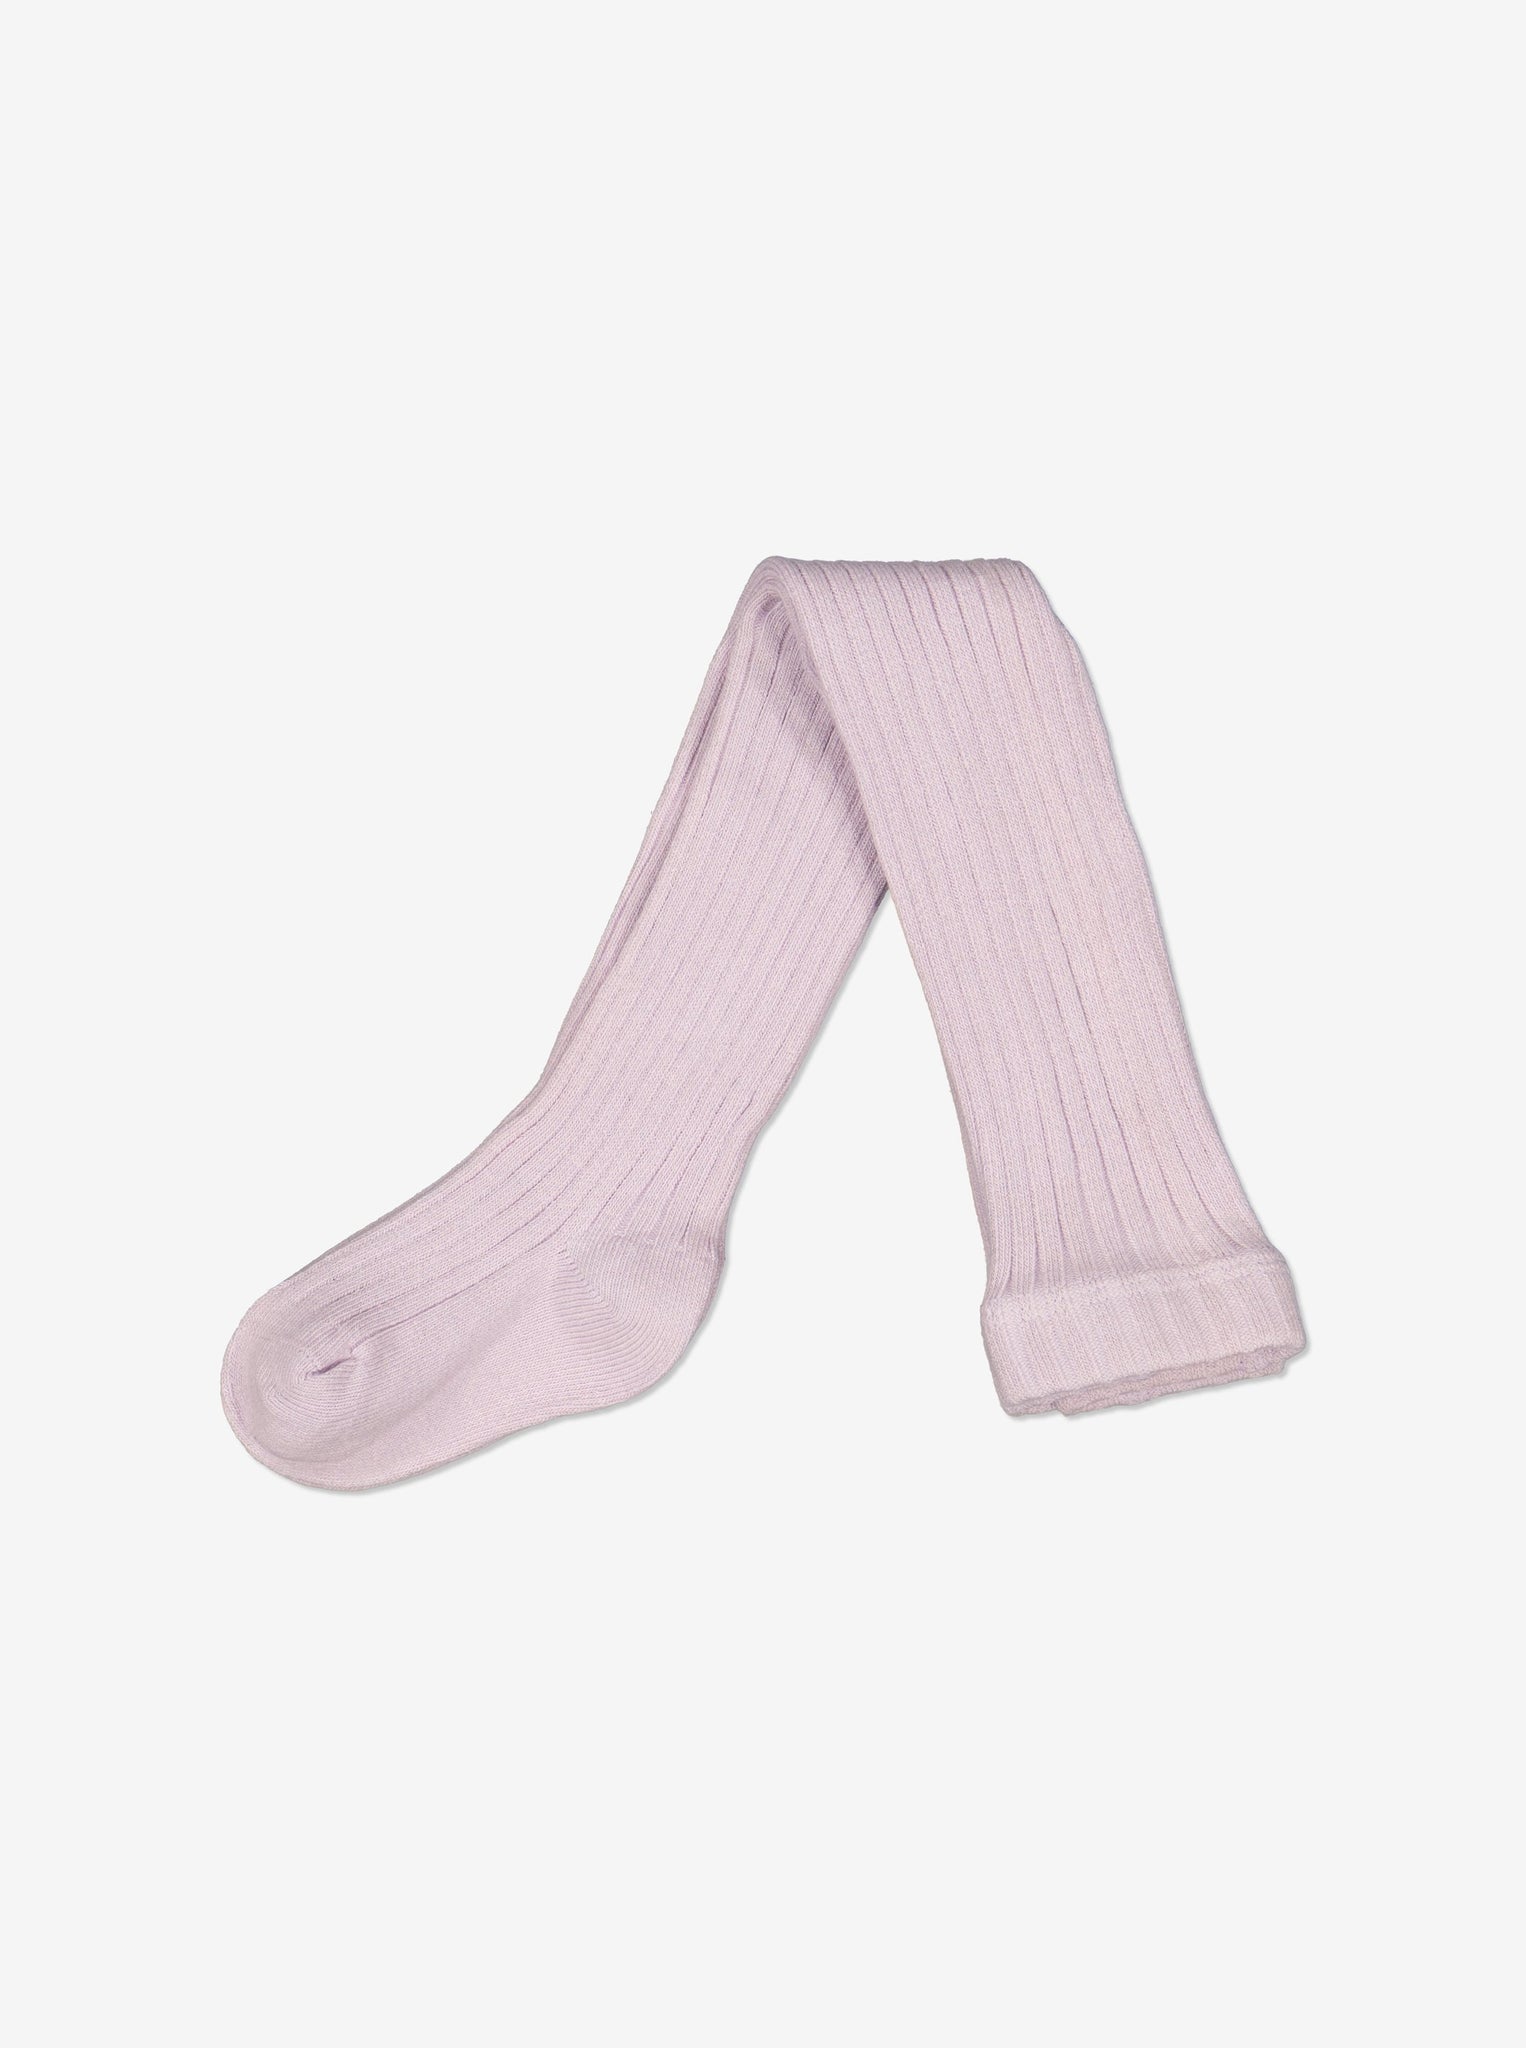  Organic Pink Baby Ribbed Tights from Polarn O. Pyret Kidswear. Made from eco-friendly materials.